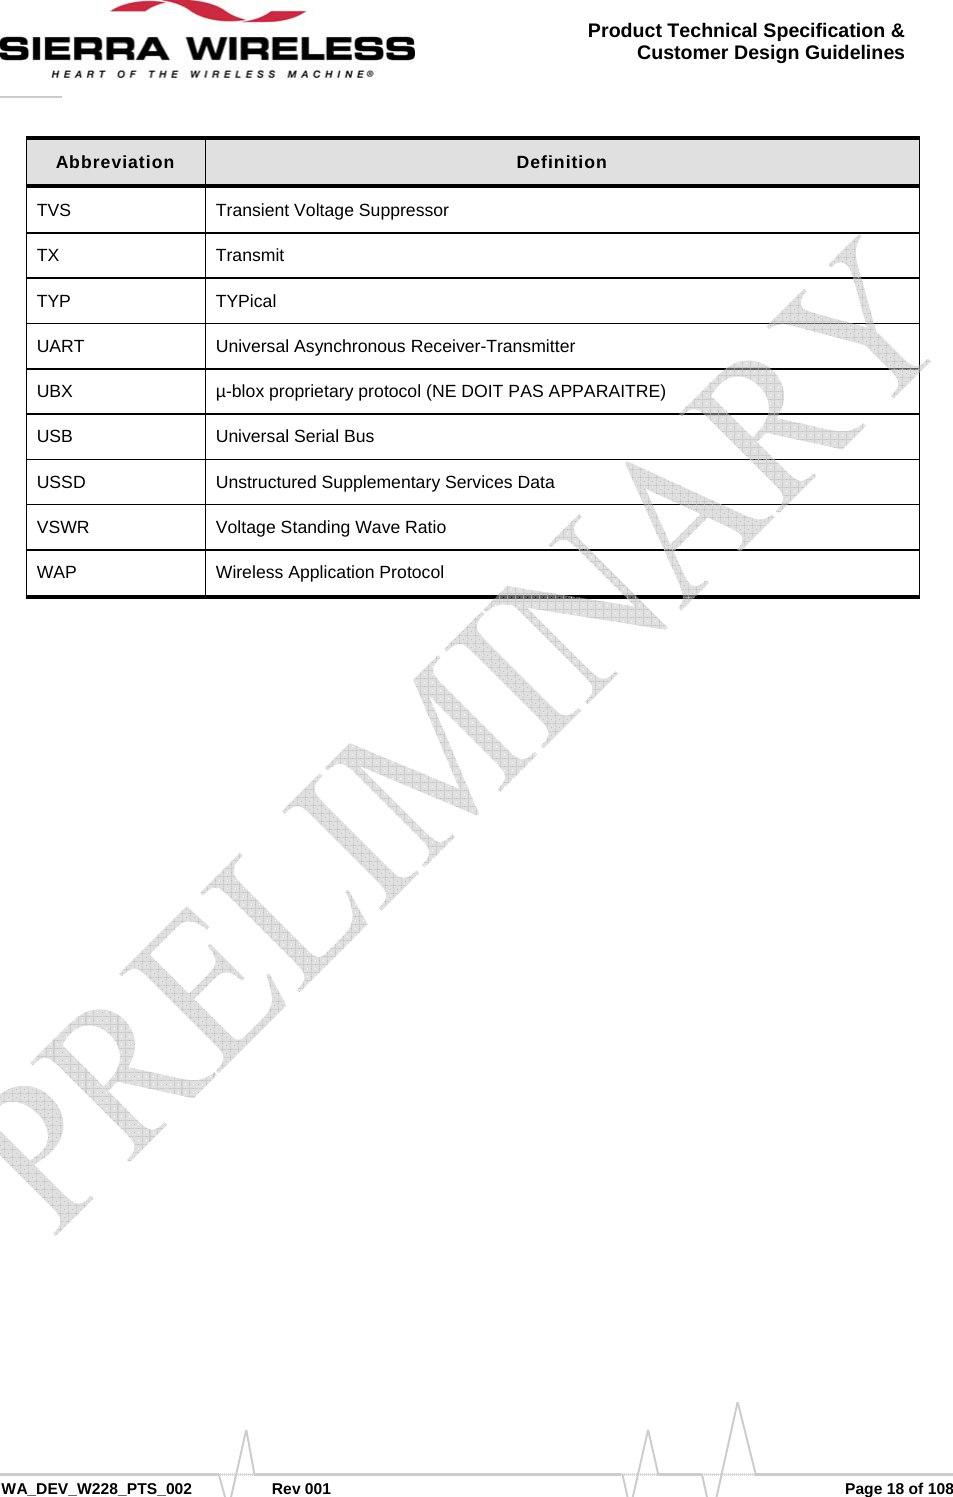      WA_DEV_W228_PTS_002 Rev 001  Page 18 of 108 Product Technical Specification &amp; Customer Design Guidelines Abbreviation  Definition TVS Transient Voltage Suppressor TX Transmit TYP TYPical UART Universal Asynchronous Receiver-Transmitter UBX  µ-blox proprietary protocol (NE DOIT PAS APPARAITRE) USB  Universal Serial Bus USSD Unstructured Supplementary Services Data VSWR Voltage Standing Wave Ratio WAP  Wireless Application Protocol    